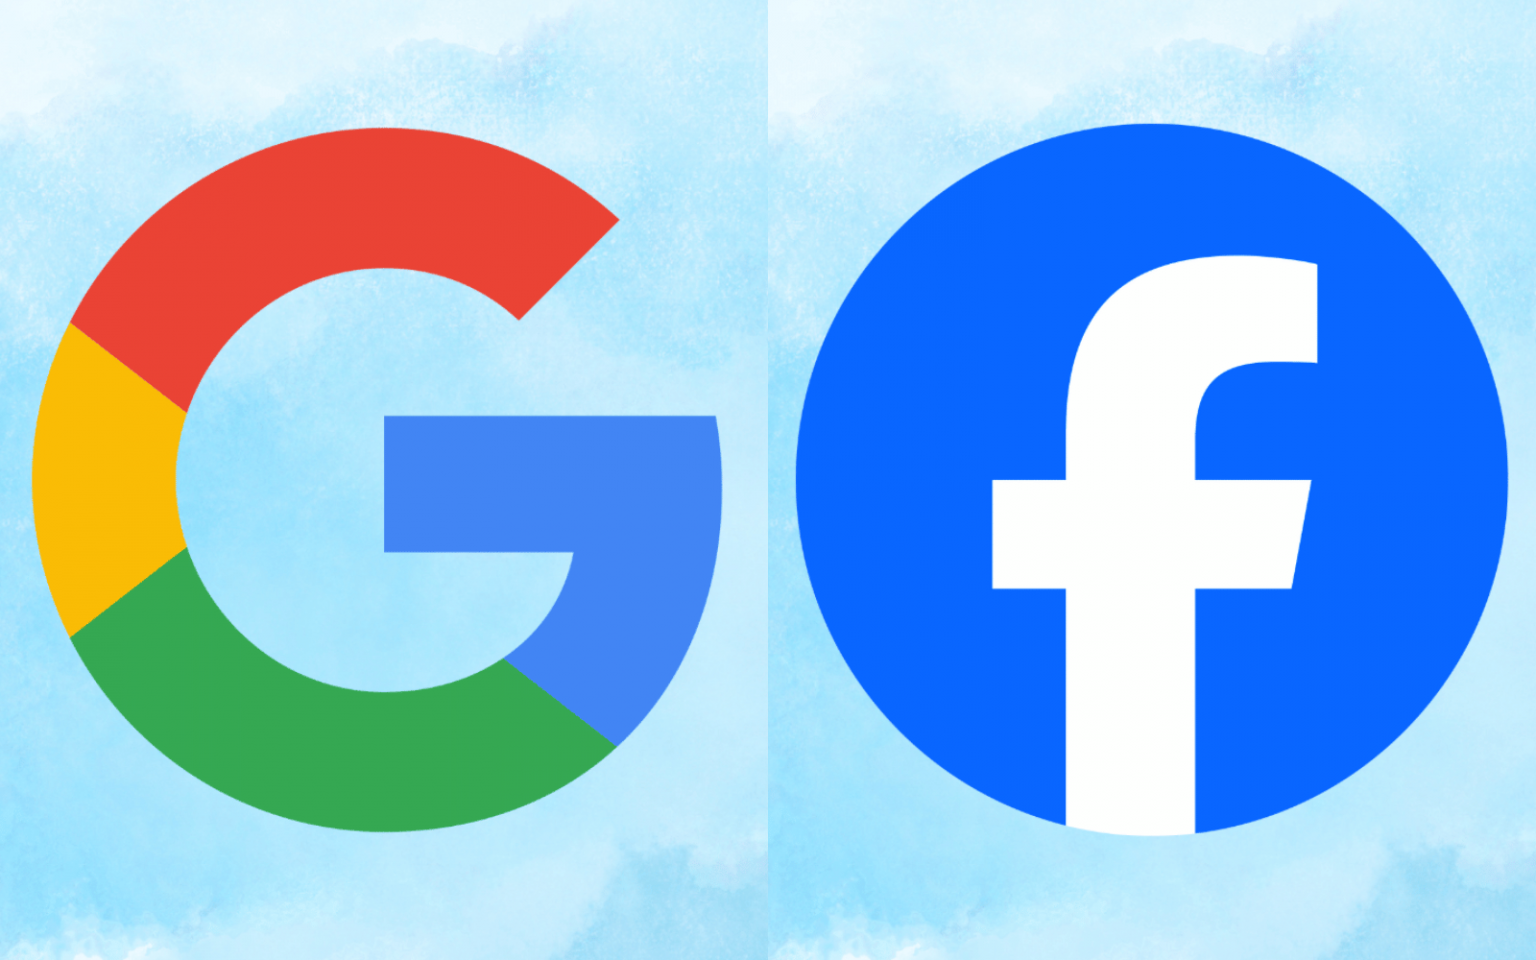 Google and Facebook can't be trusted